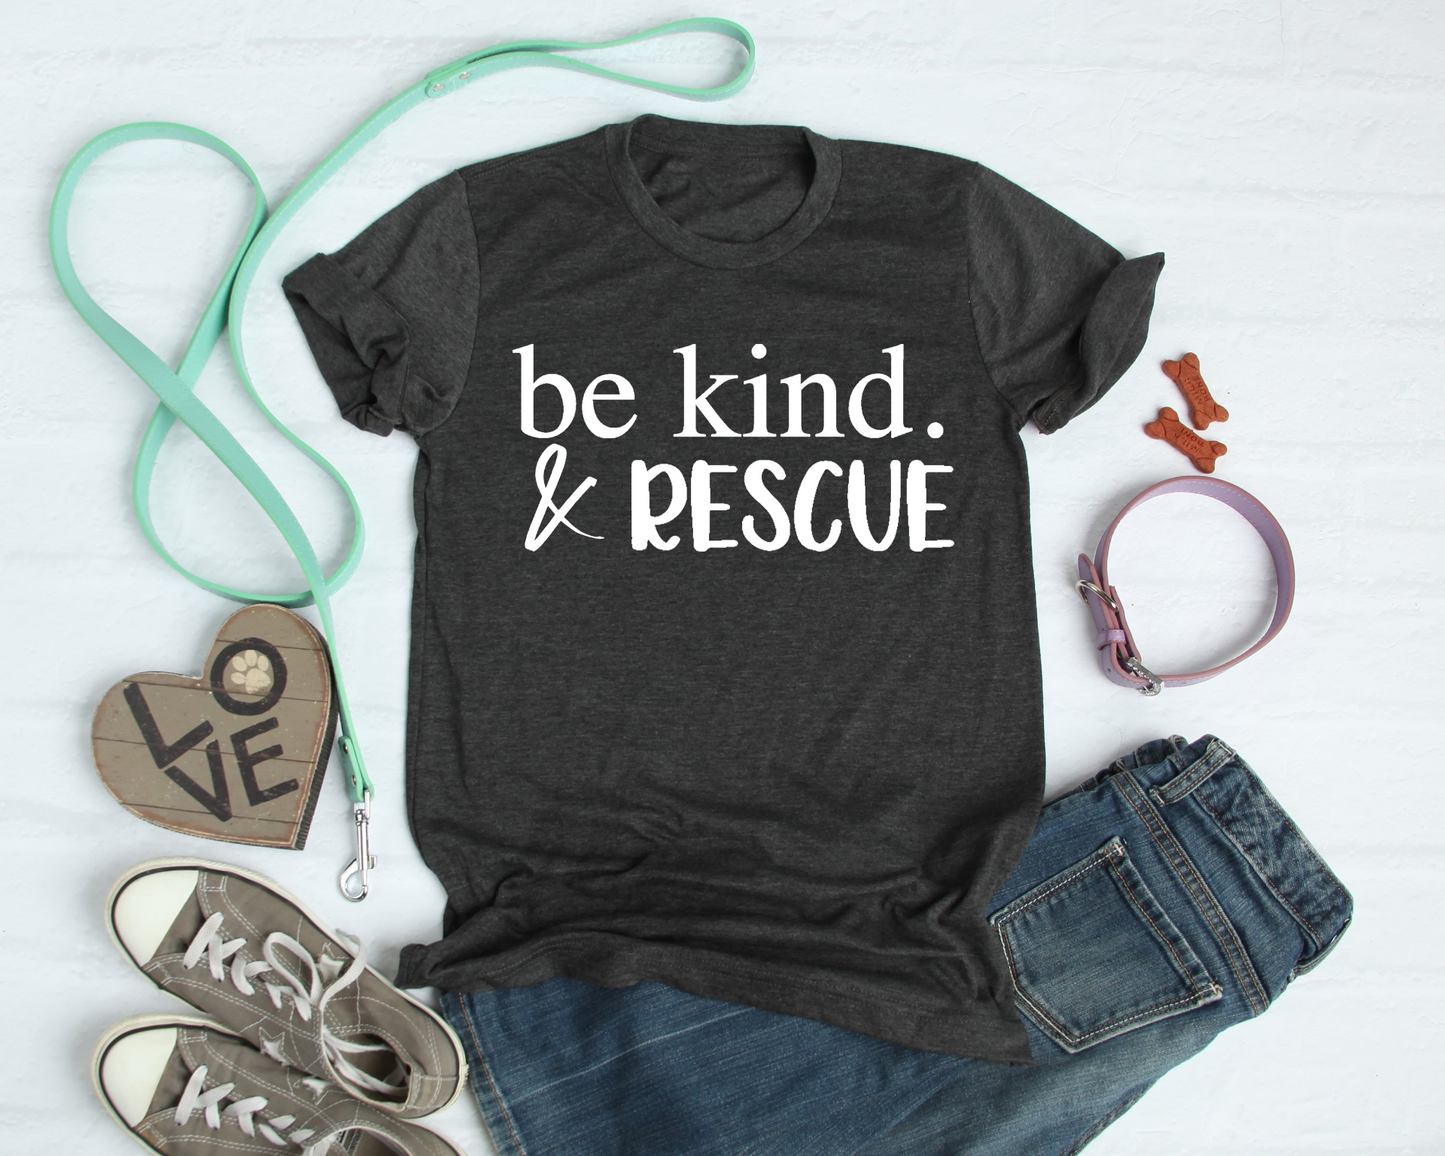 Be Kind and Rescue - Support our Rescue Partner, Goodies N Stuff